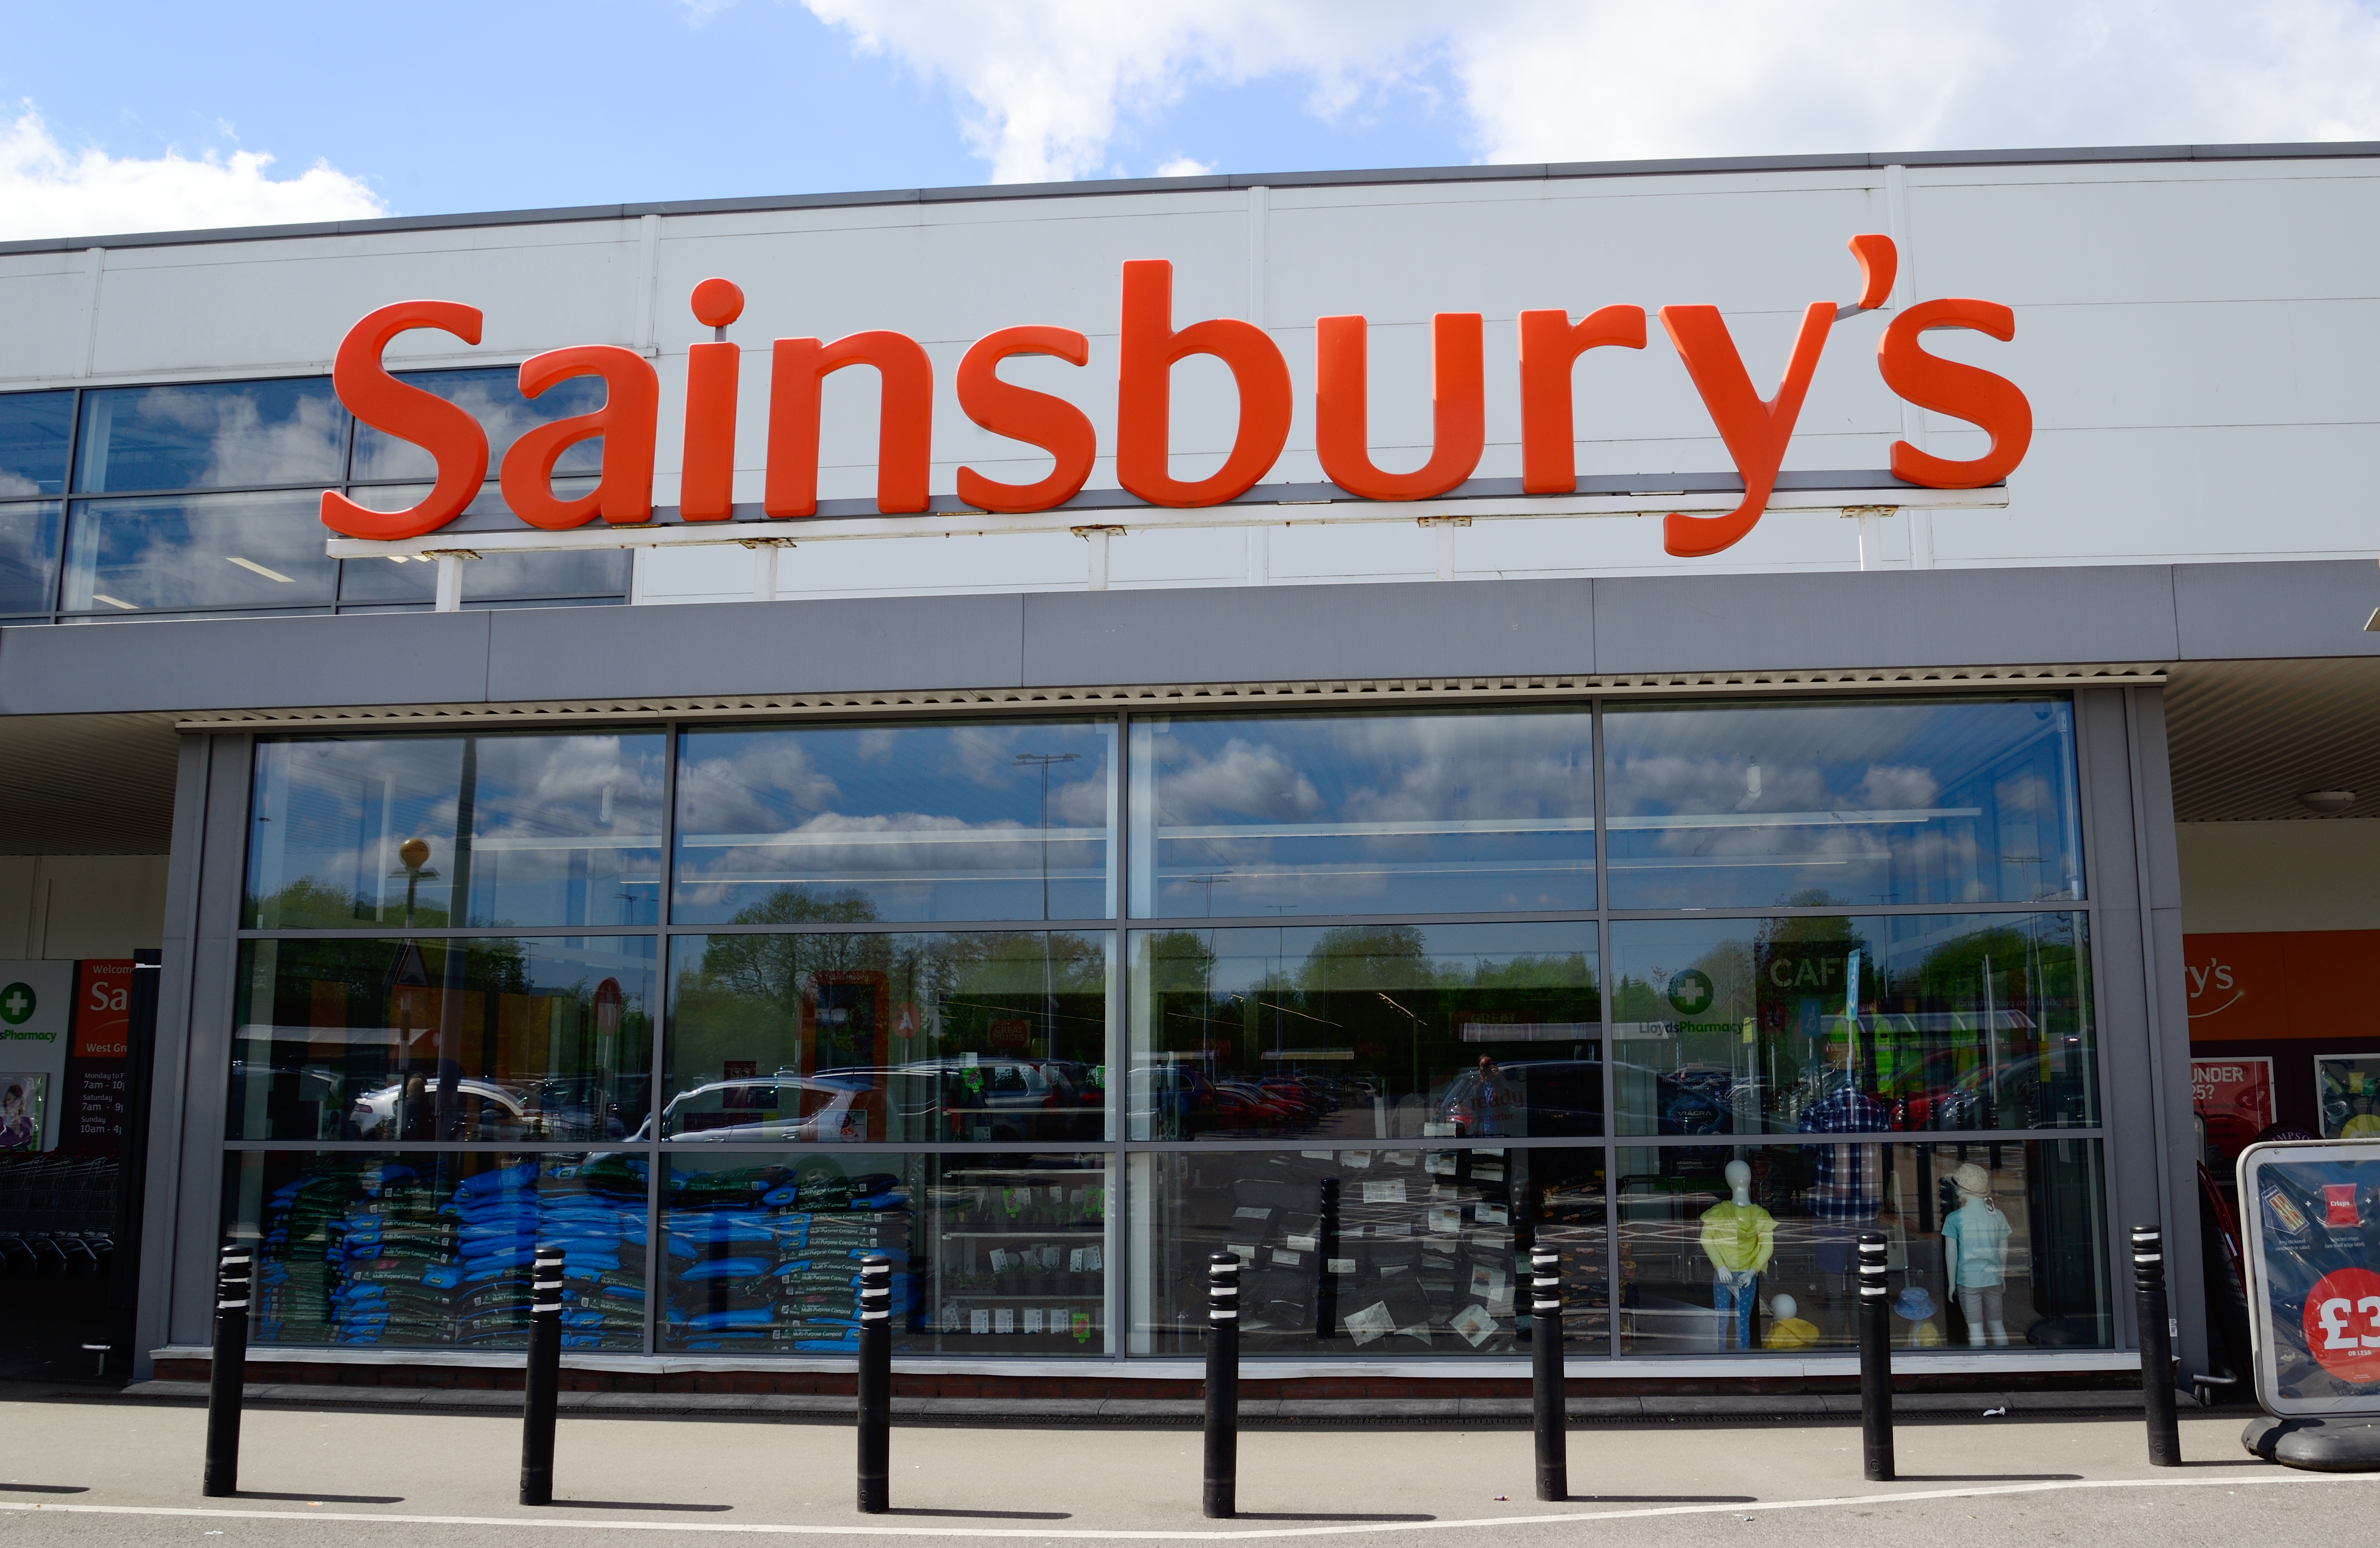 Sainsbury's has made a point of making their winter products affordable